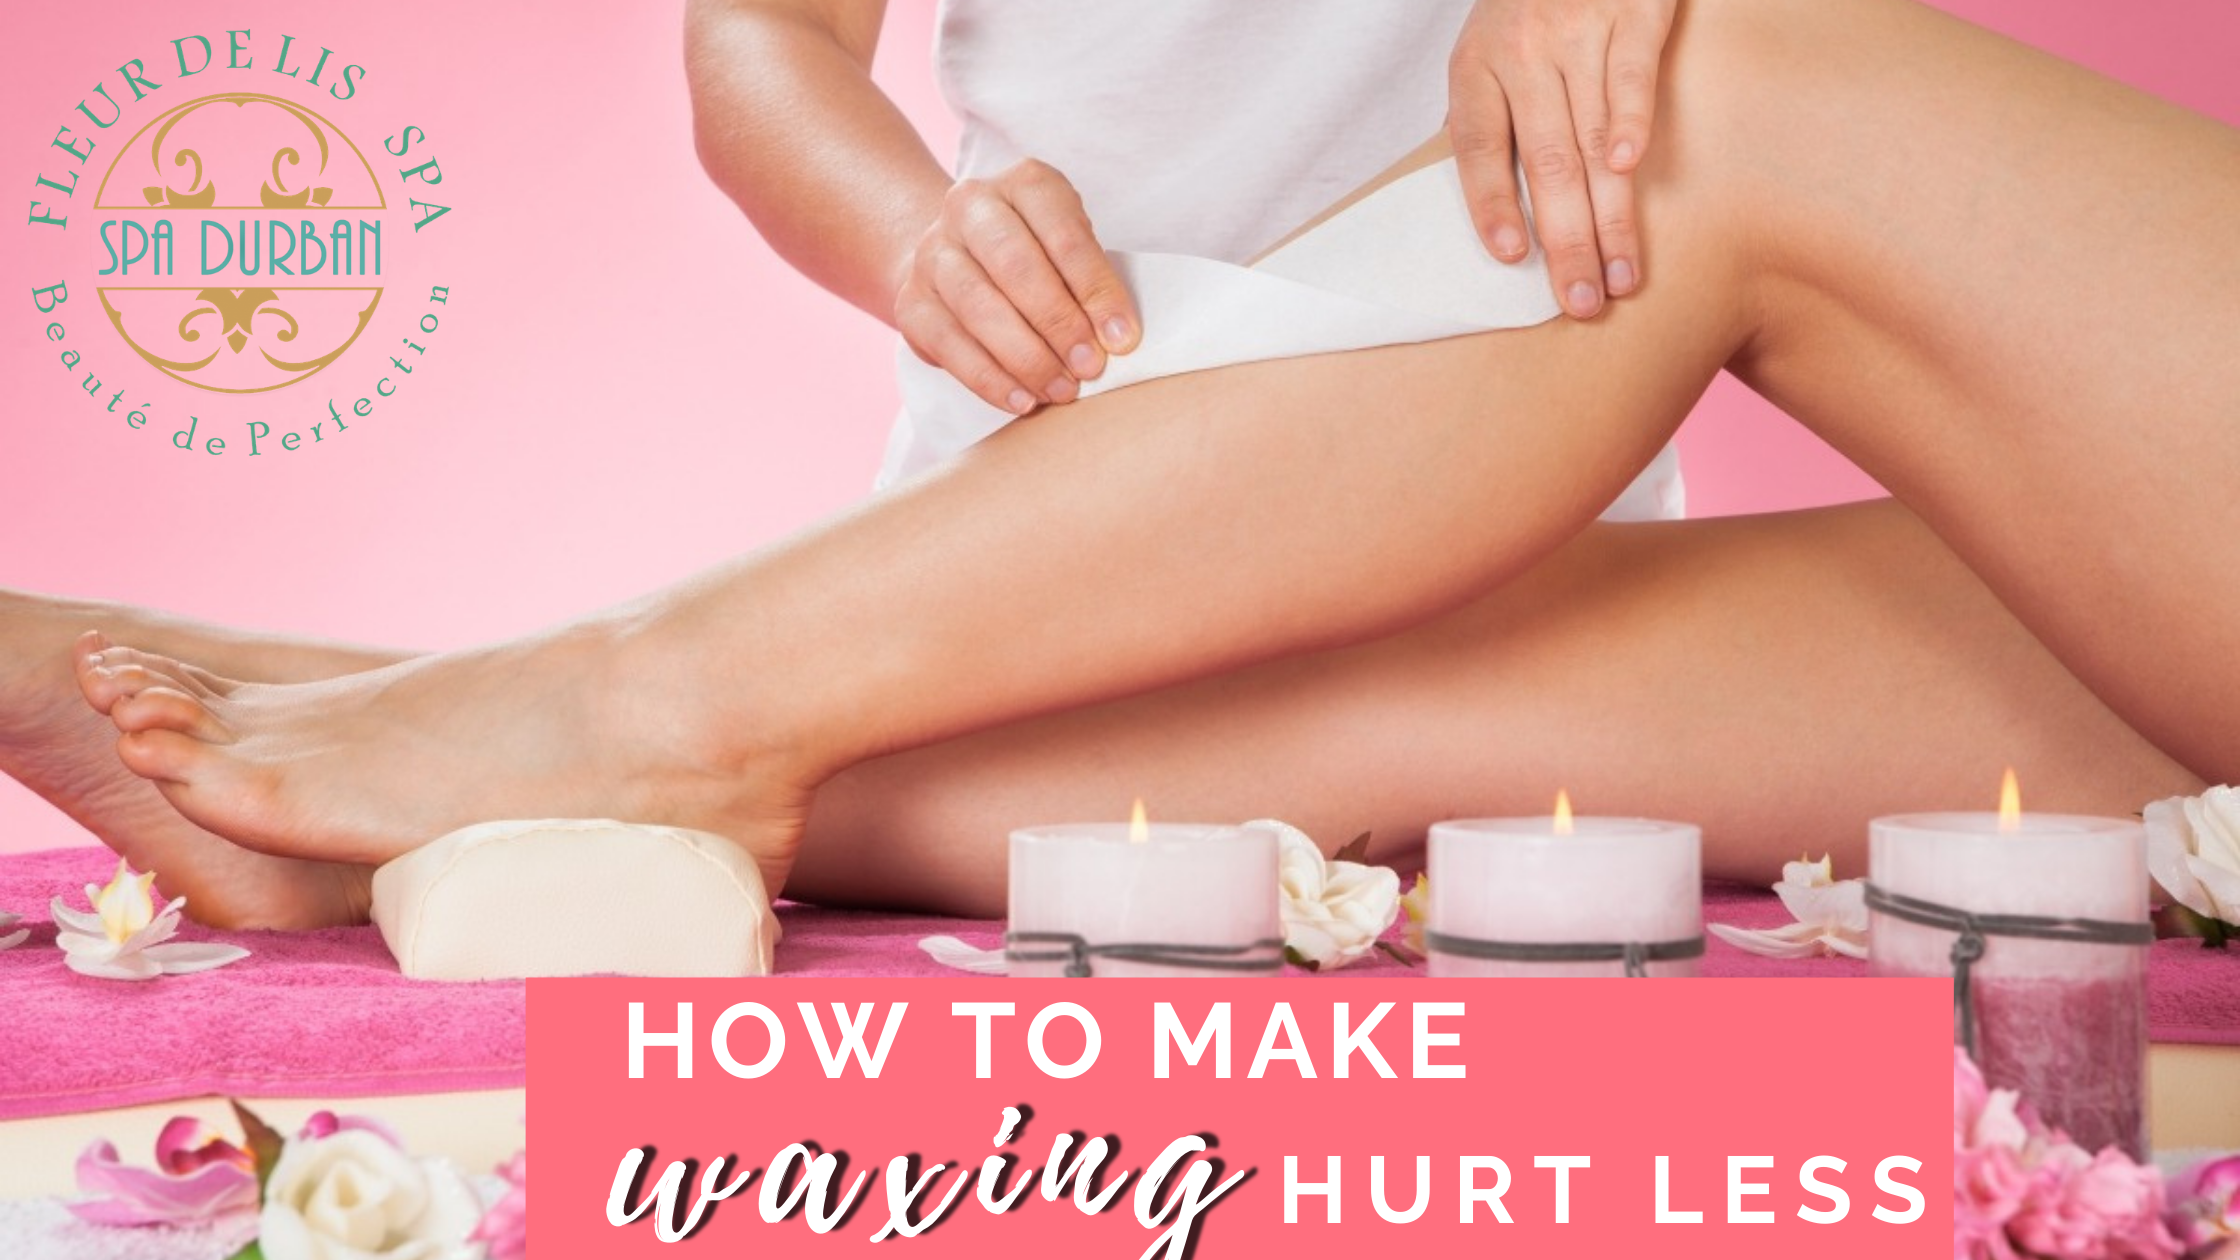 How to Make Waxing Hurt Less